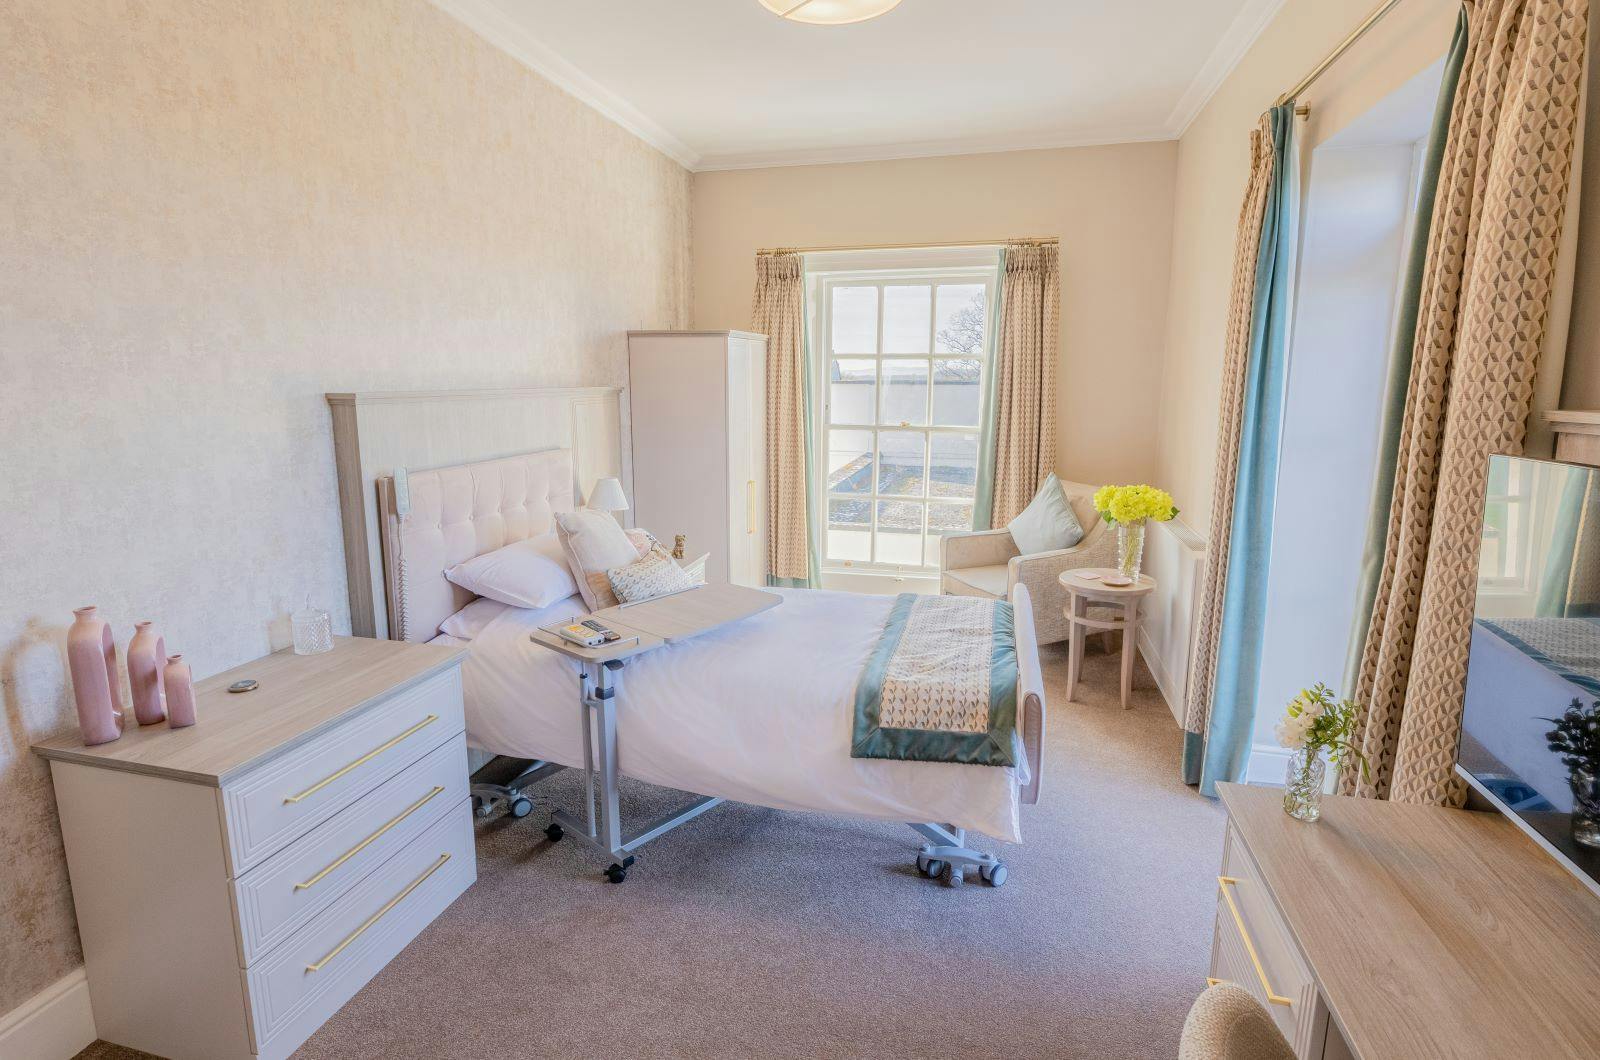 Bedroom at Knowle Park Care Home in Surrey, South East